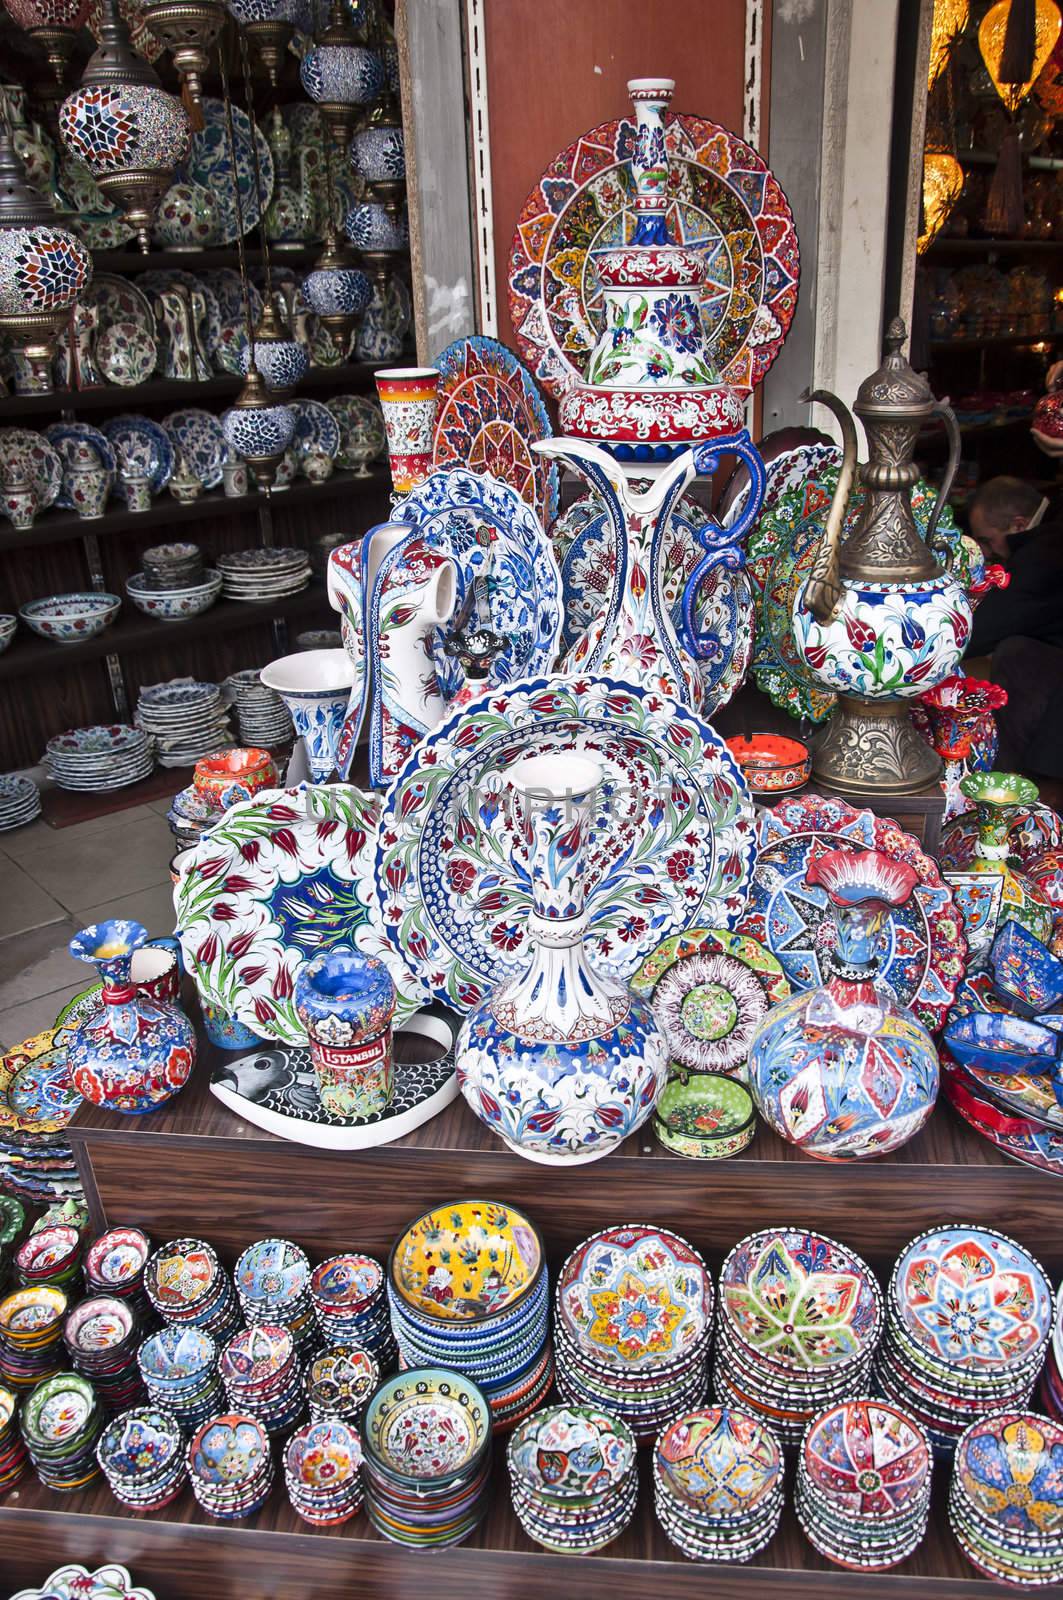 Hand-made Turkish souvenirs, objects and pottery with traditional designs, legacy of Ottoman Empire, Istanbul